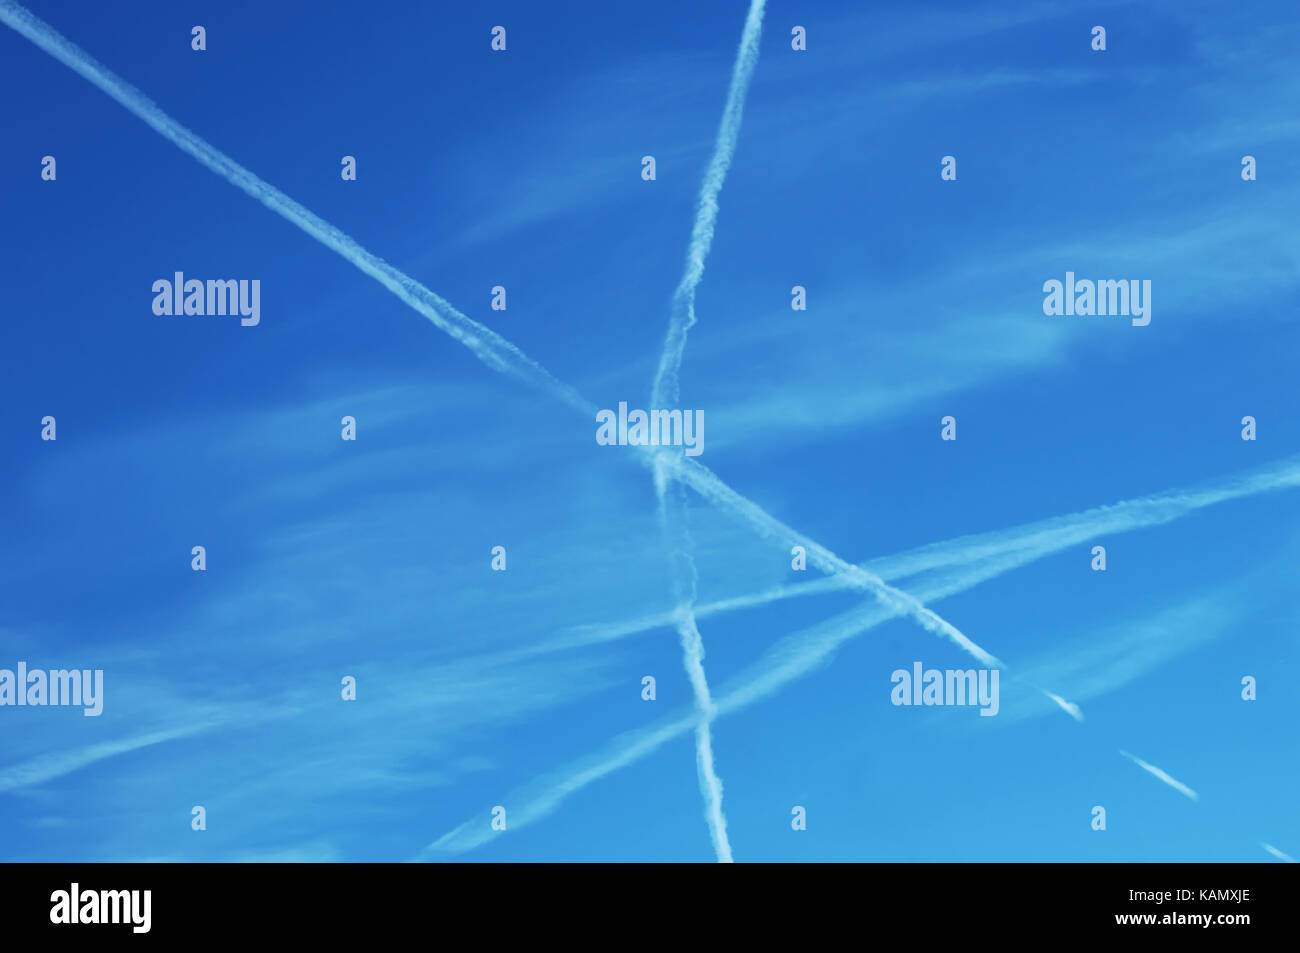 Jet flight patterns form an X in the sky.  Geometric math principle is illustrated by the crossing jet stream, intersecting lines. Stock Photo